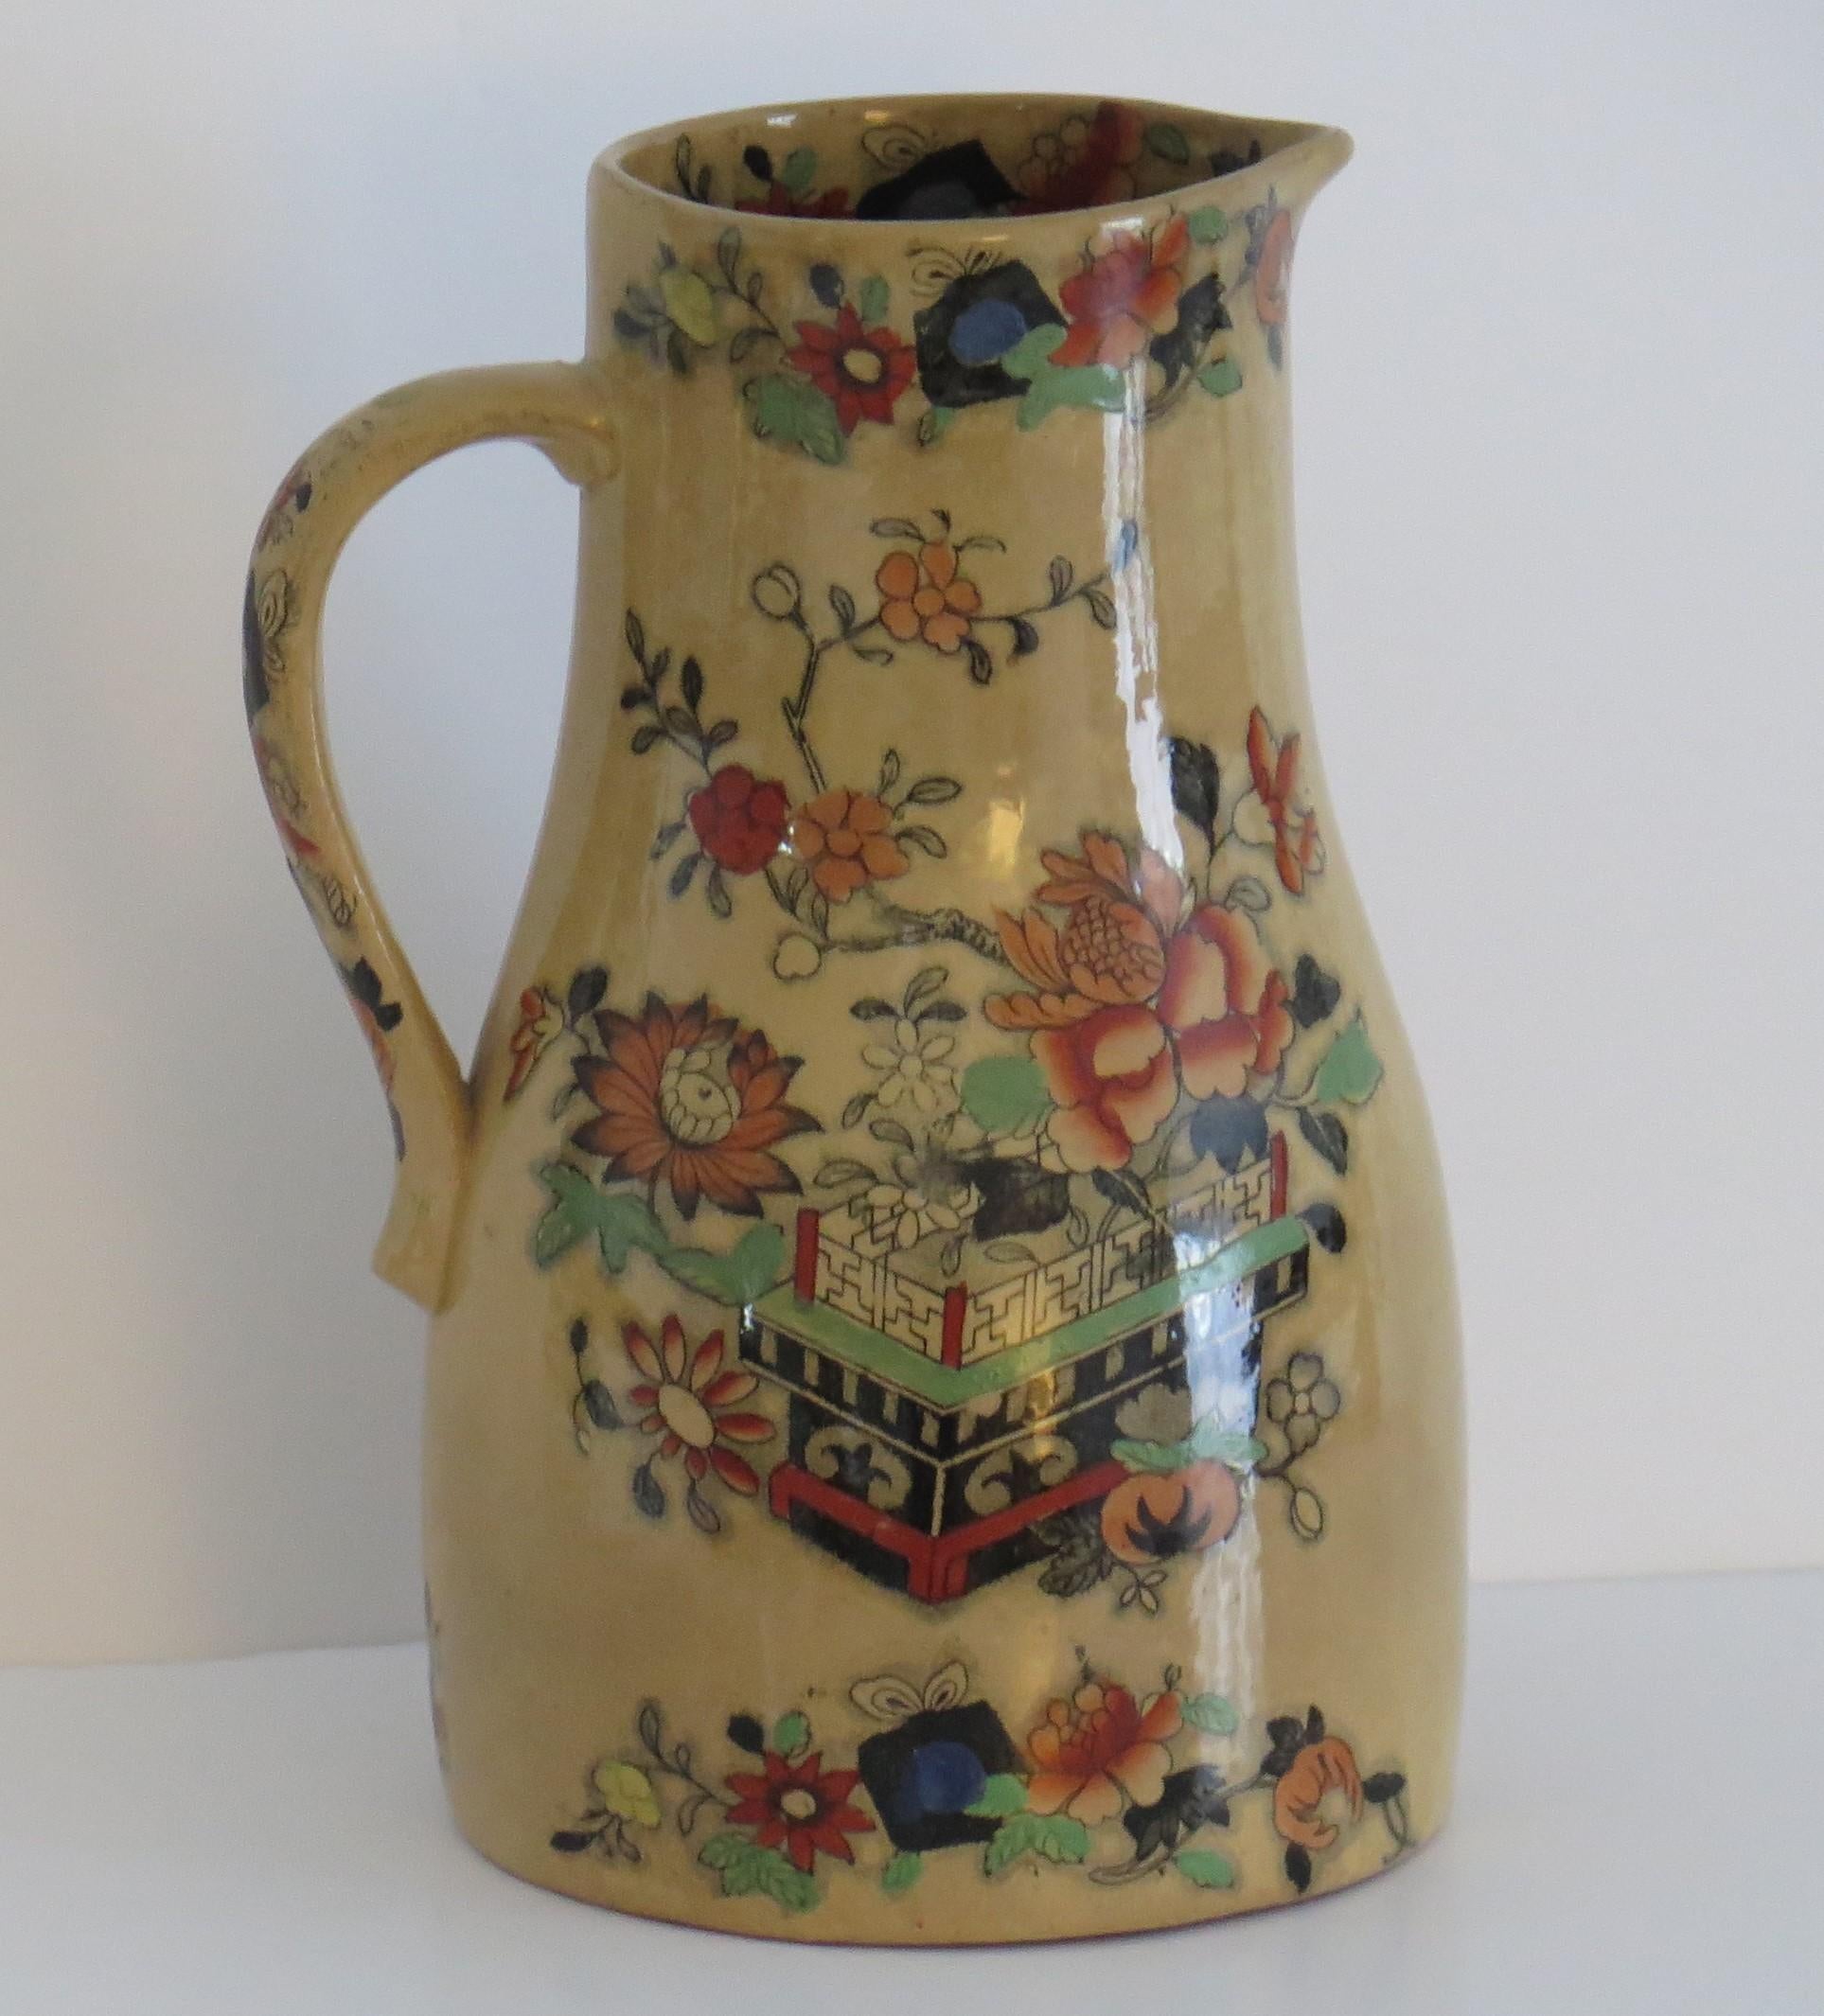 Hand-Painted Rare Mason's Ironstone Large Jug or Pitcher in Flower Box Pattern, Circa 1840